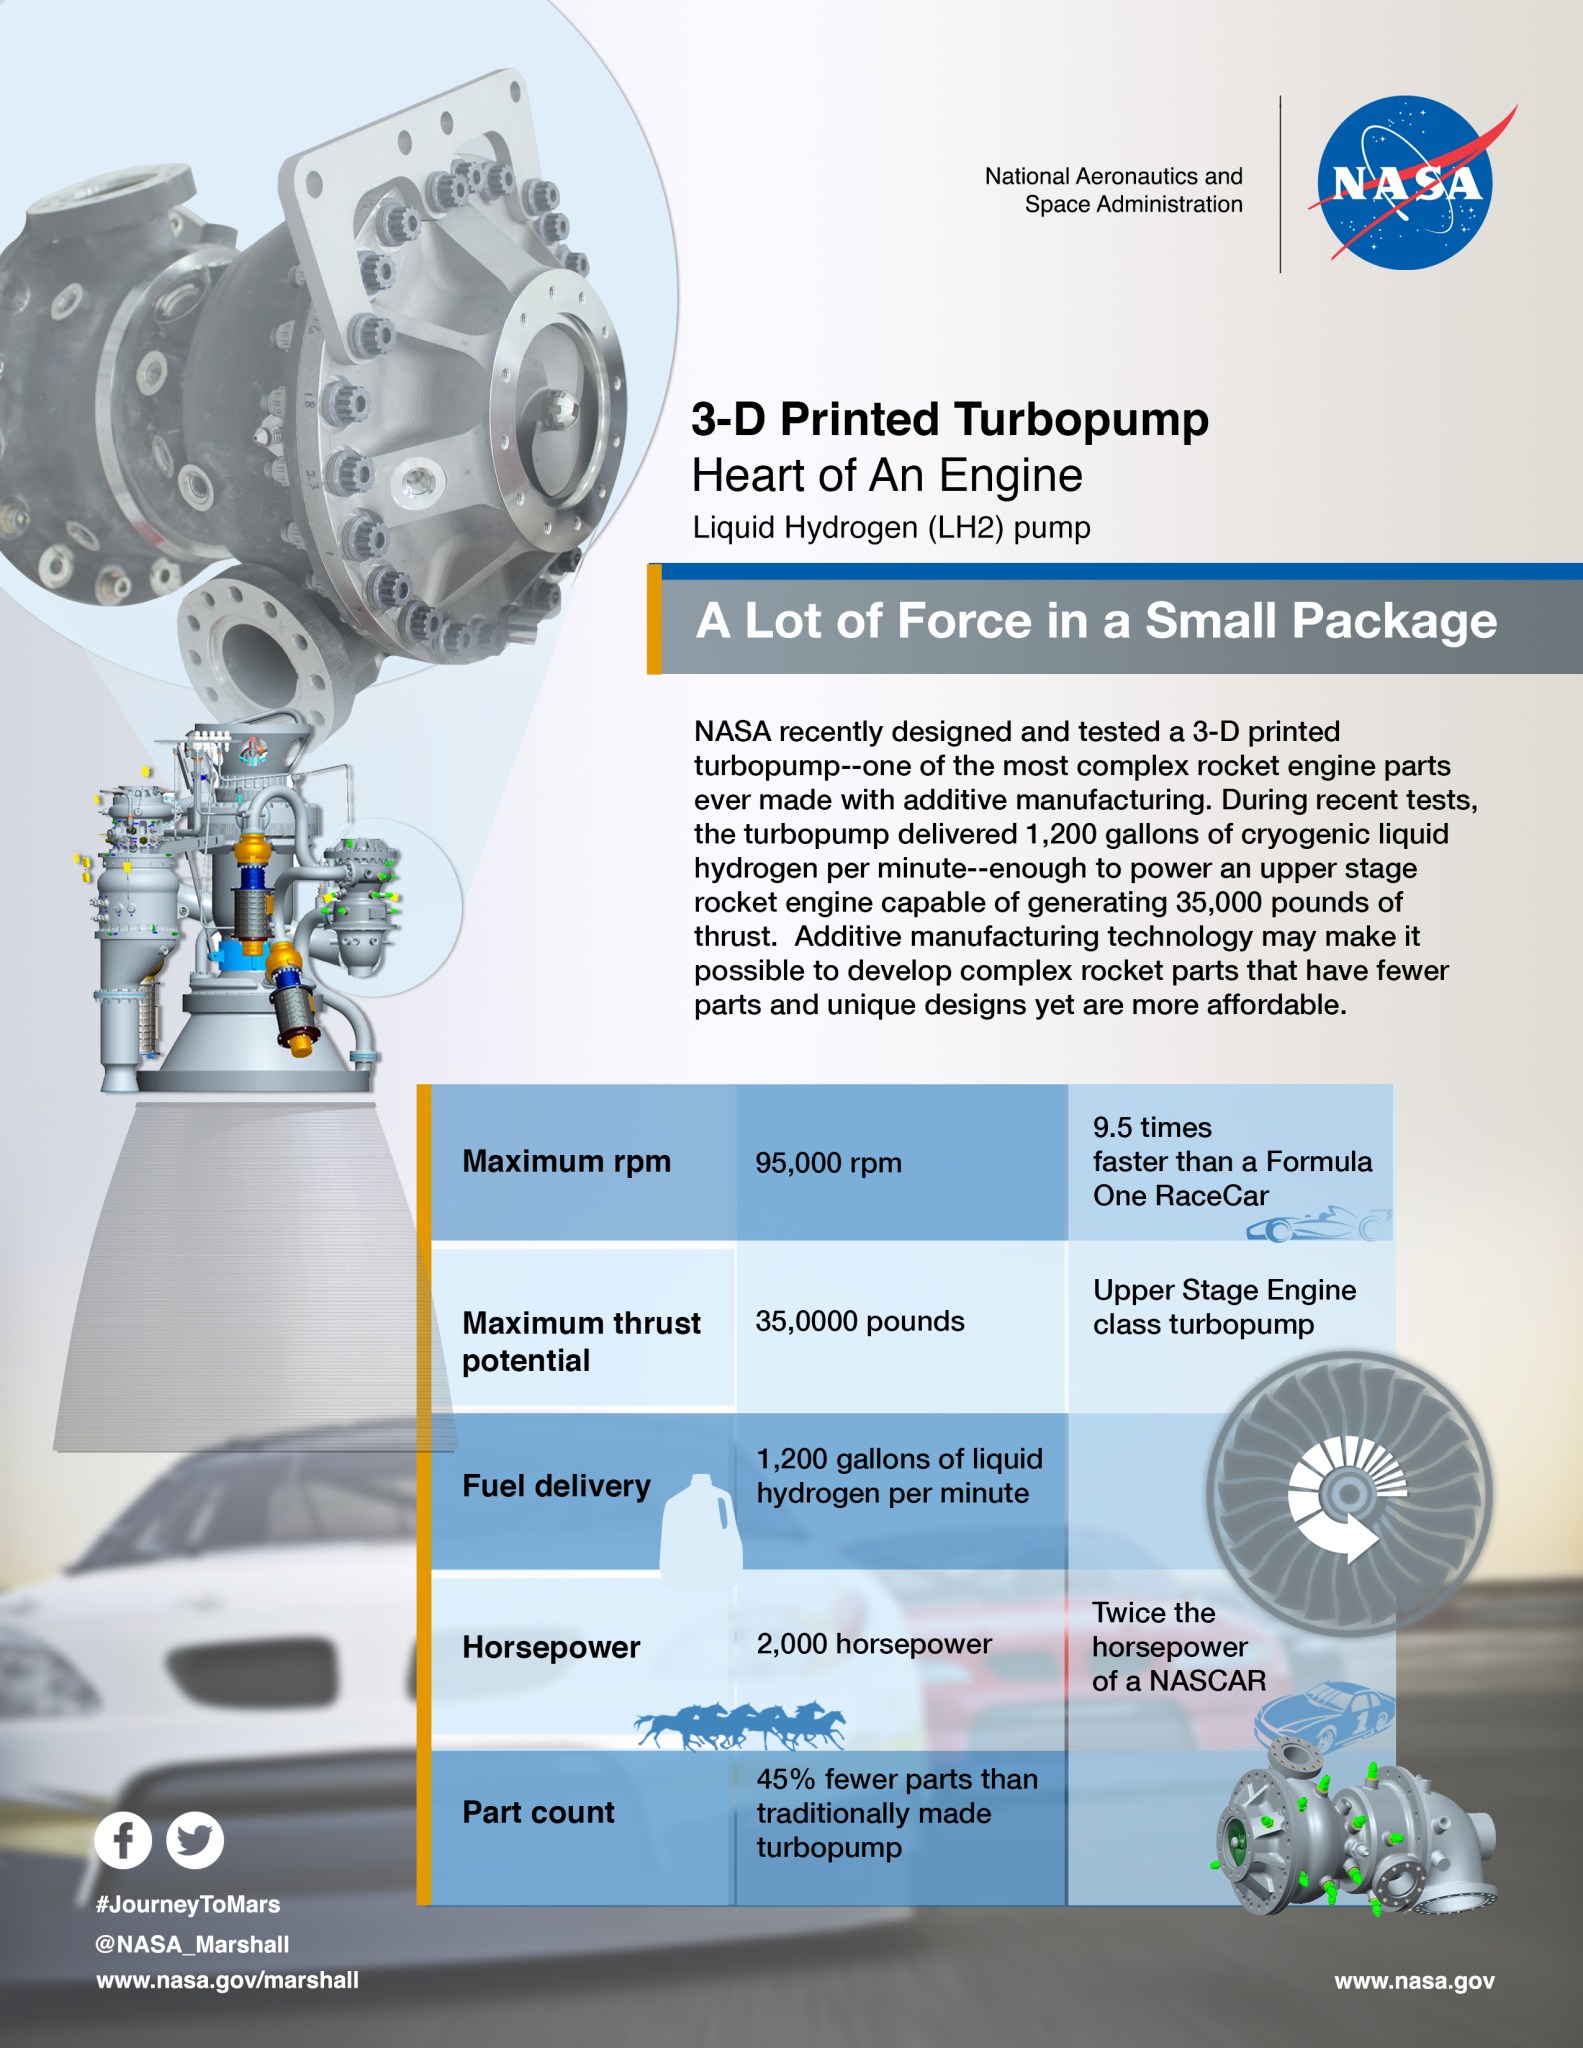 3-D Printed Turbopump: The Heart of An Engine